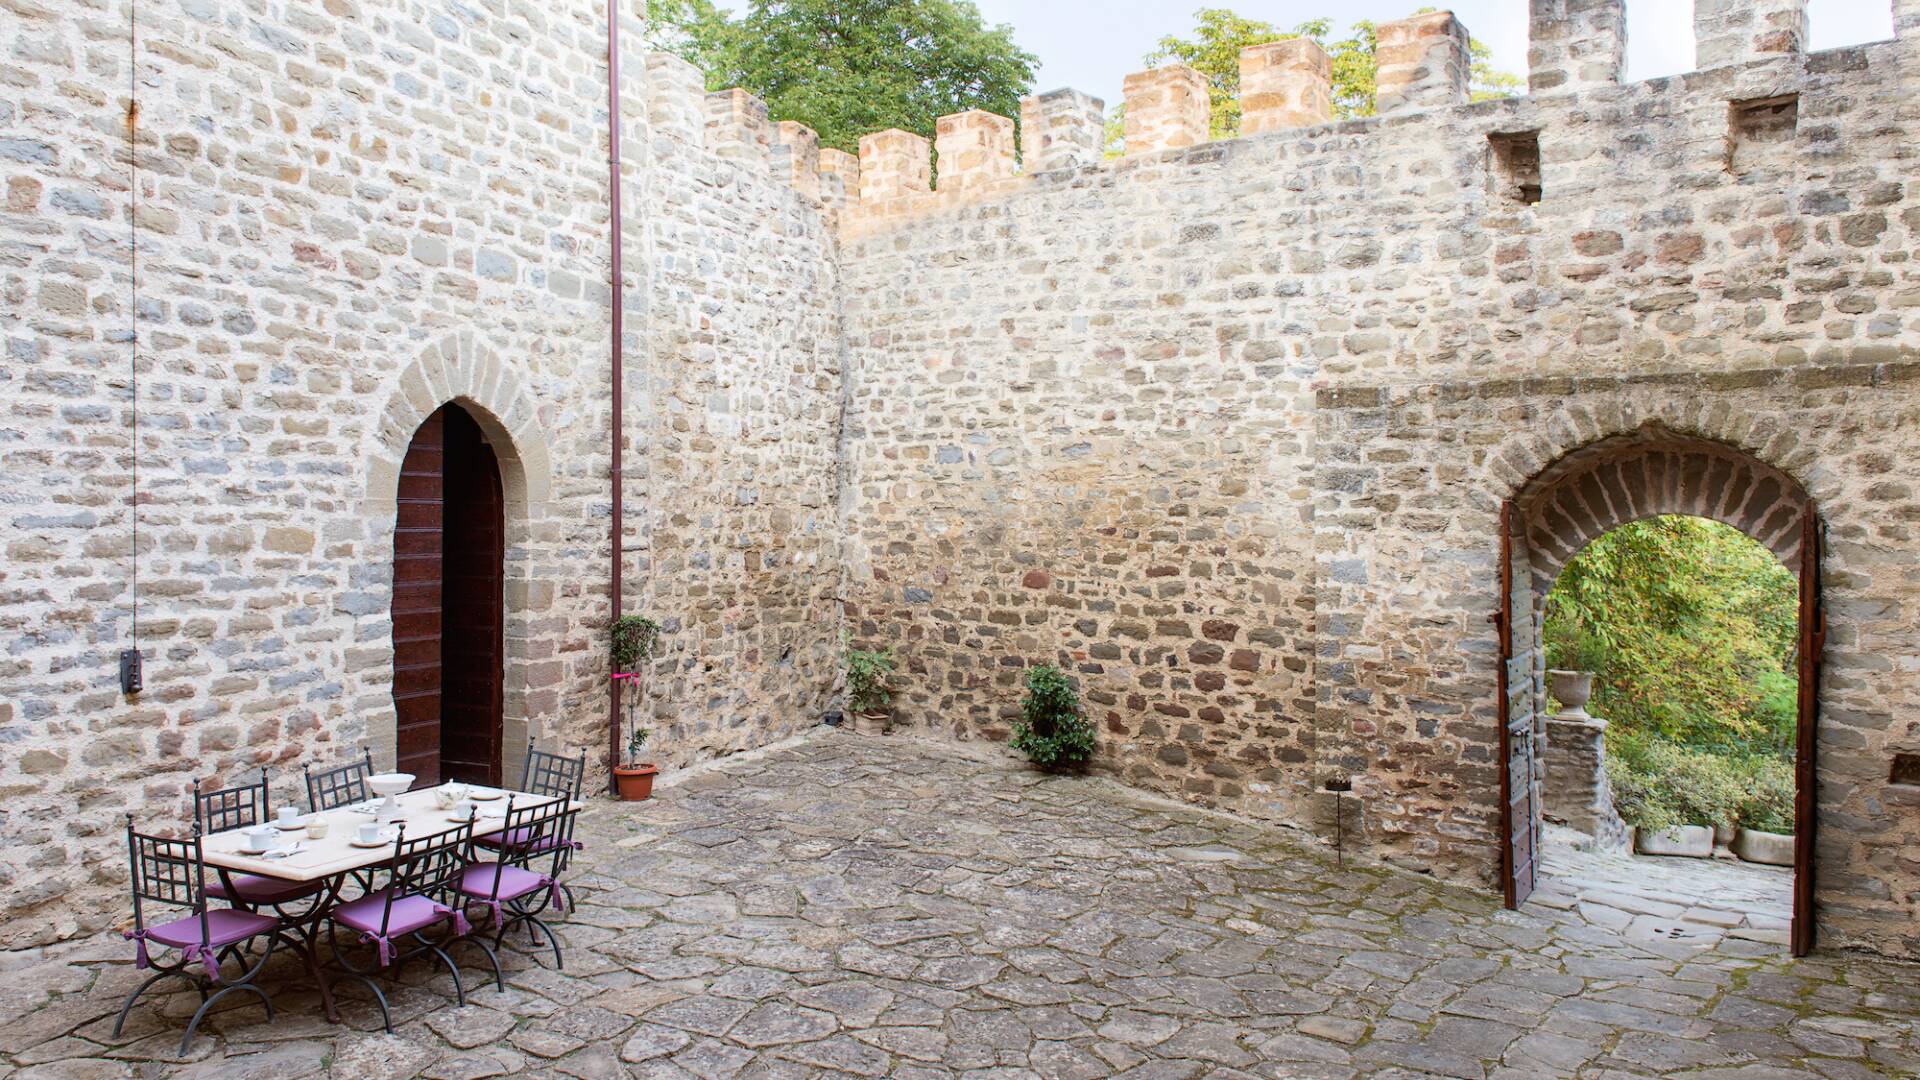 internal courtyard and entrance to the knights' hall